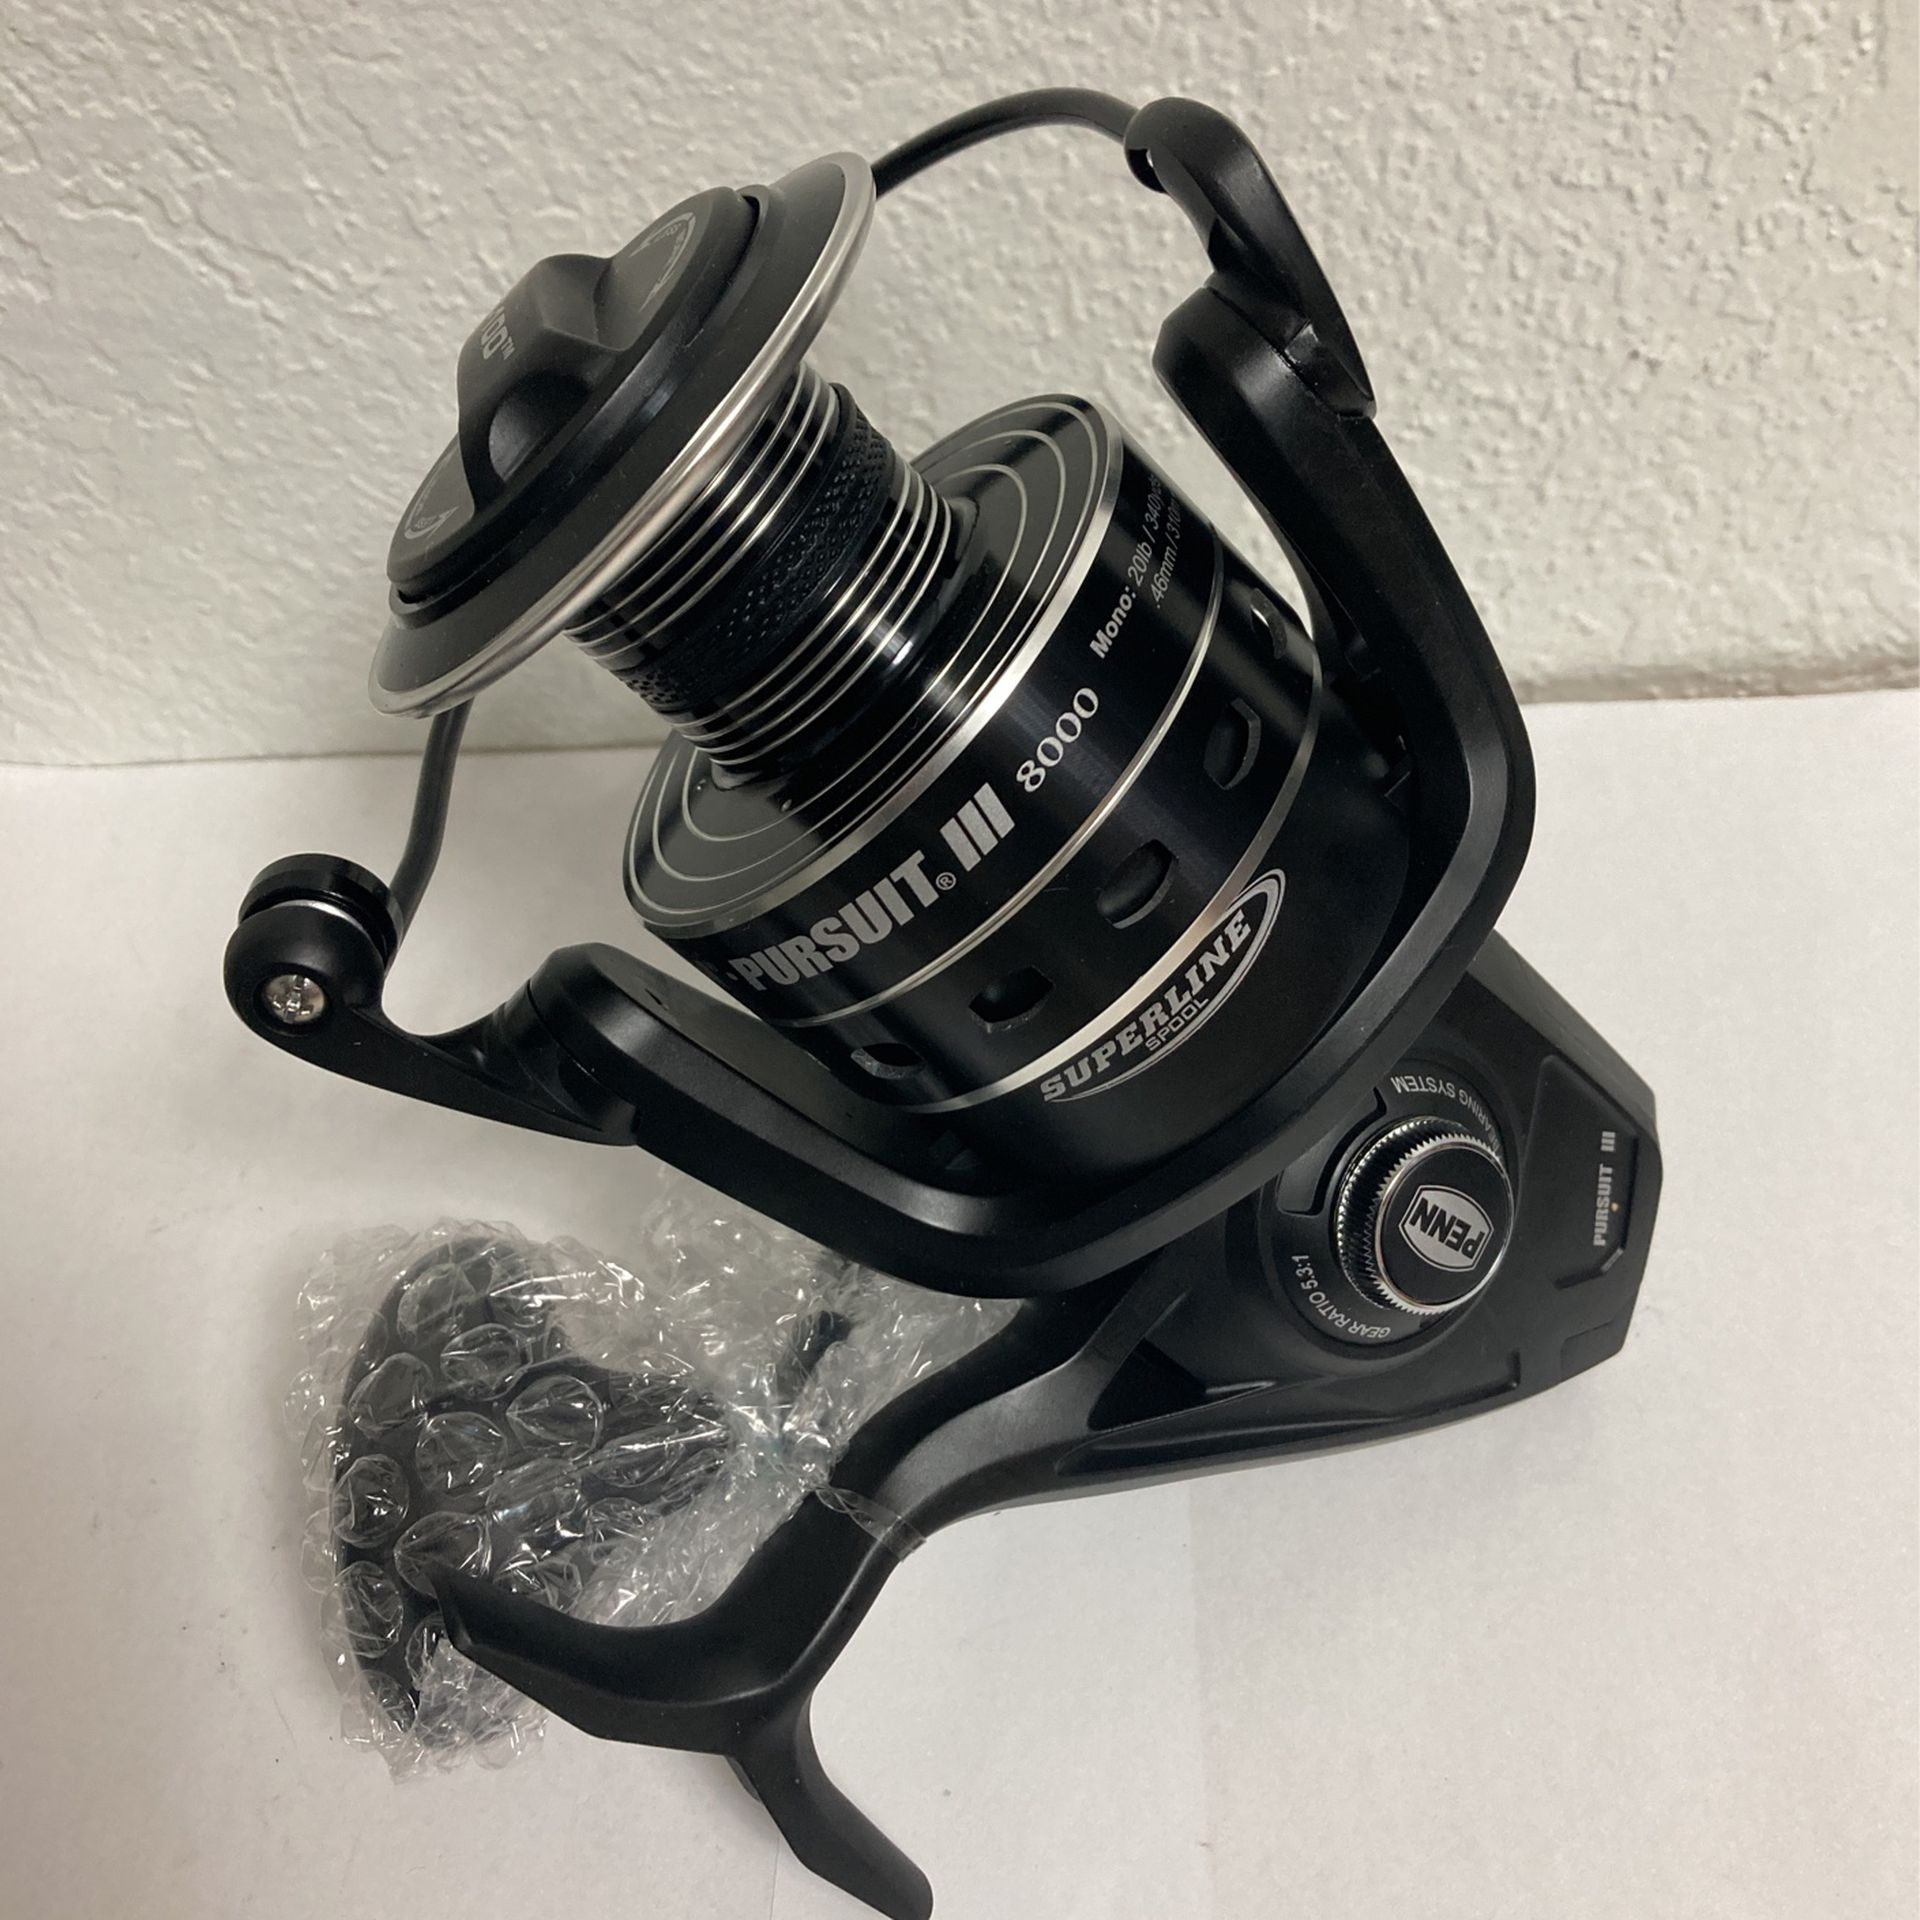 Penn Pursuit III 8000 Spinning Reel for Sale in Miami, FL - OfferUp